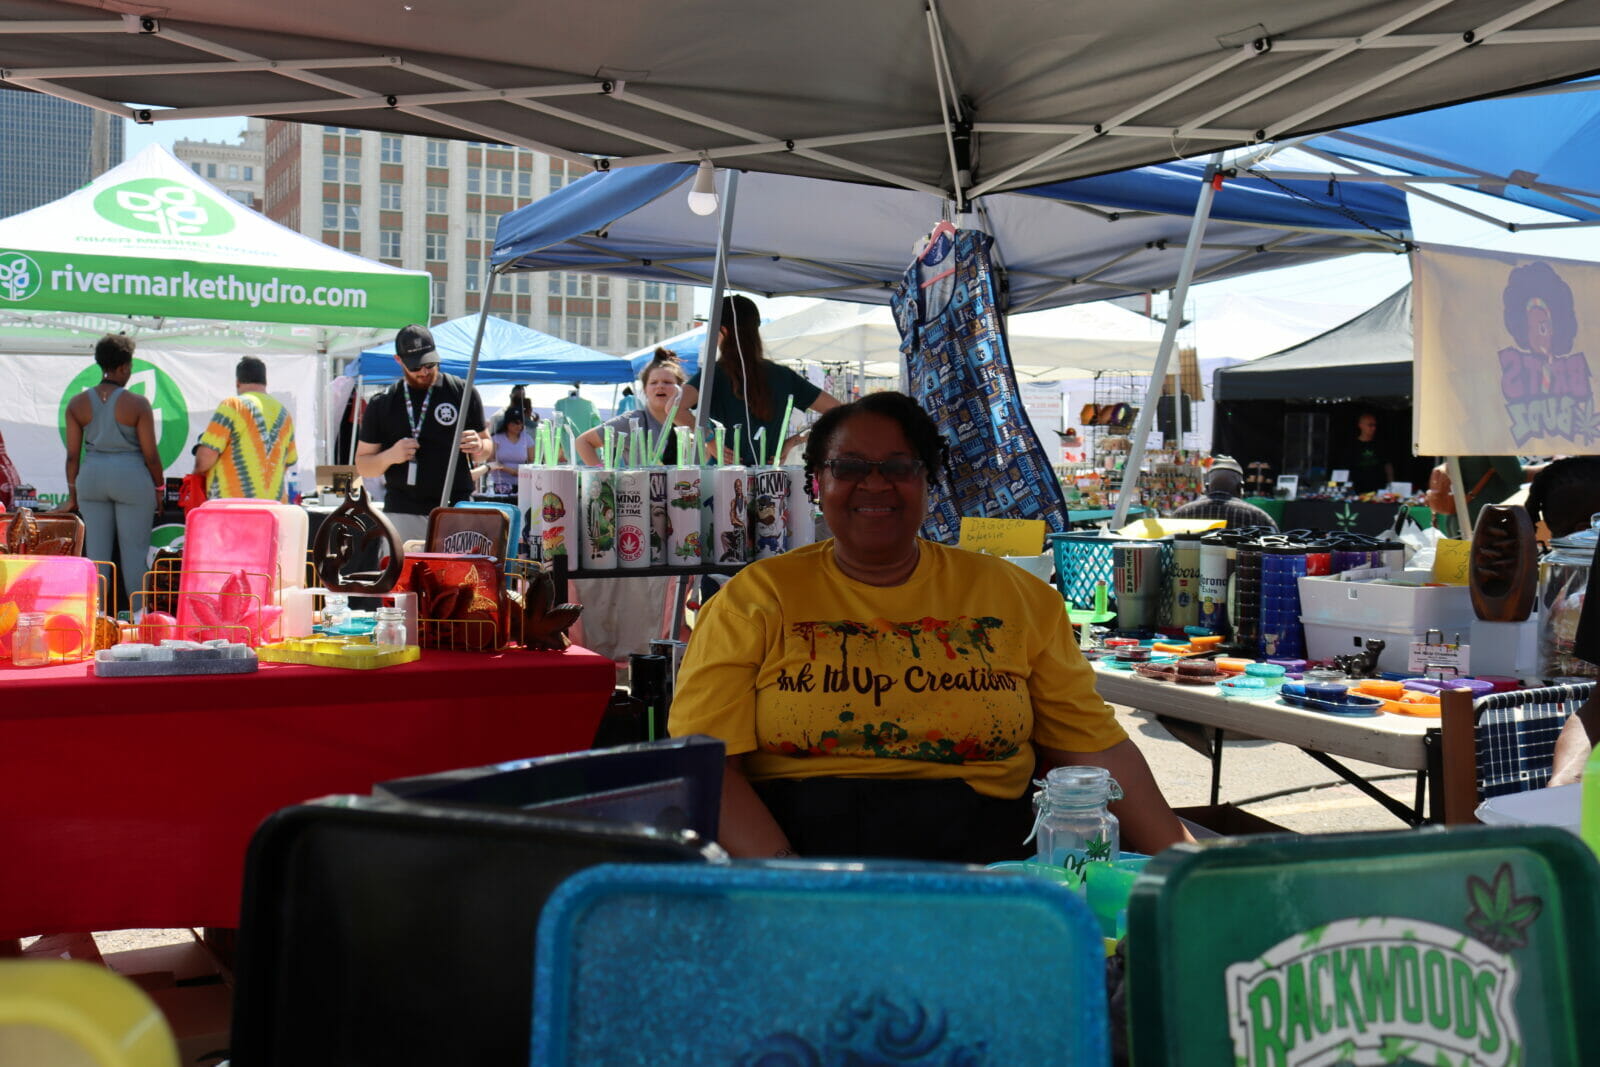 A woman in a yellow shirt that reads "Ink It Up Creations" around her are colorful rolling trays.